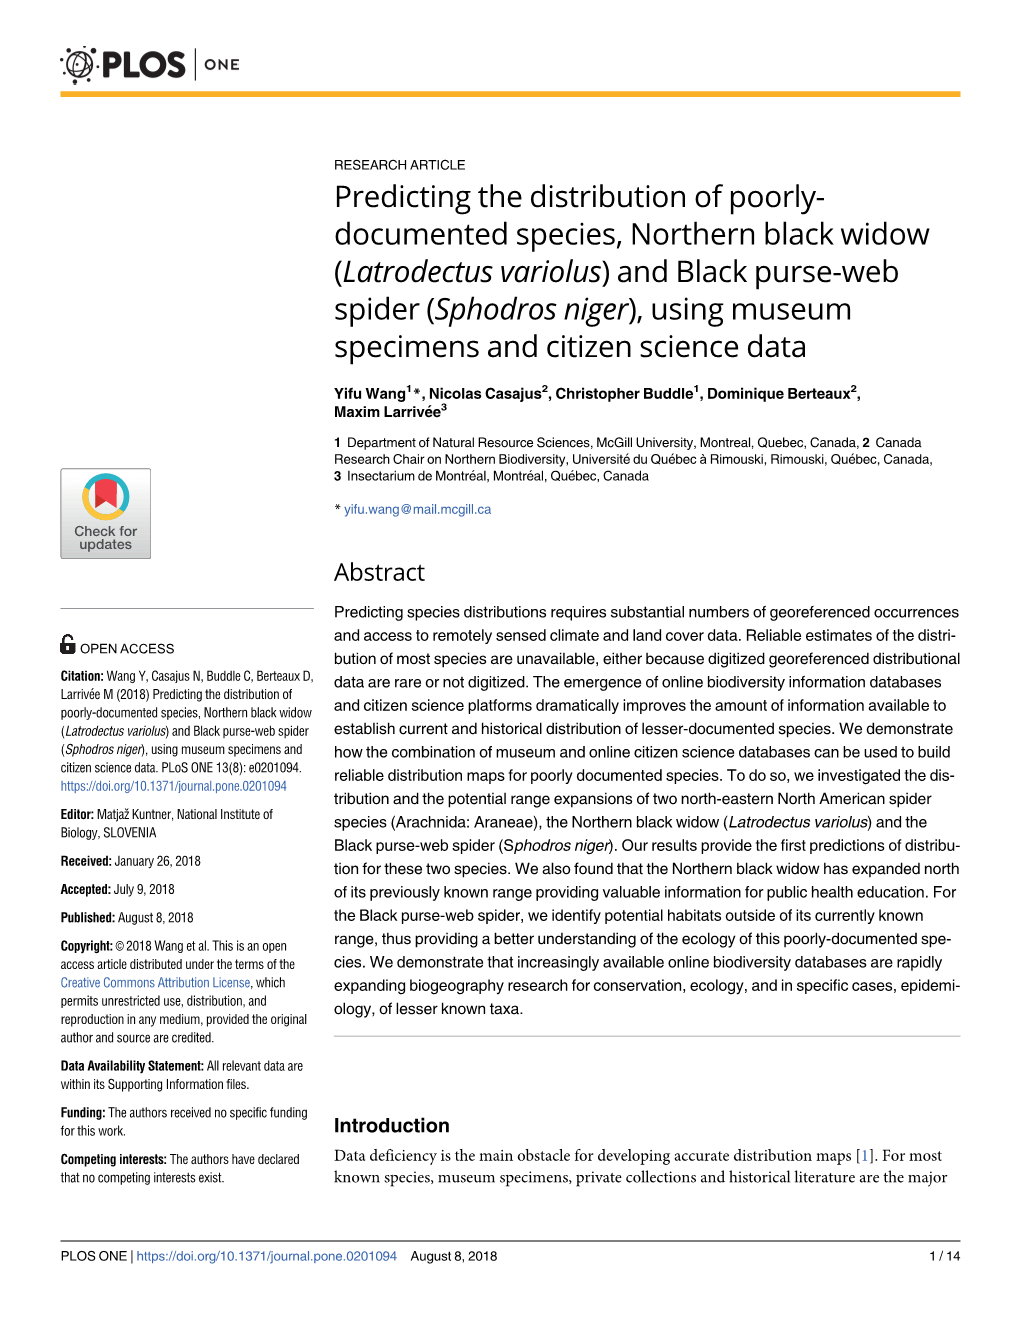 Predicting the Distribution of Poorly-Documented Species